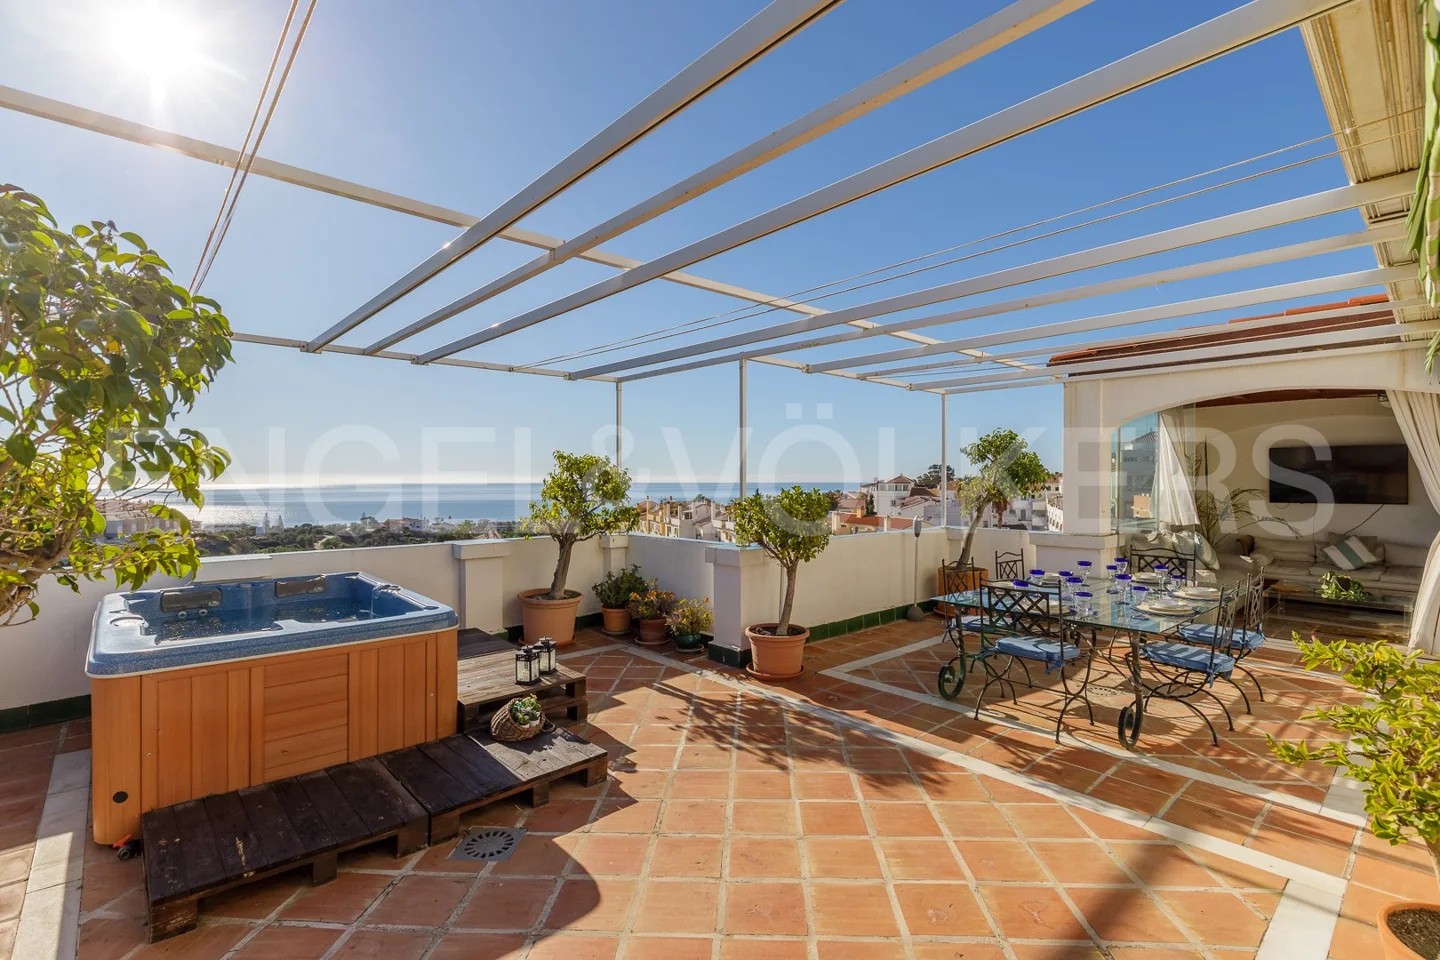 Superb penthouse in the sought after location of Anoreta Golf